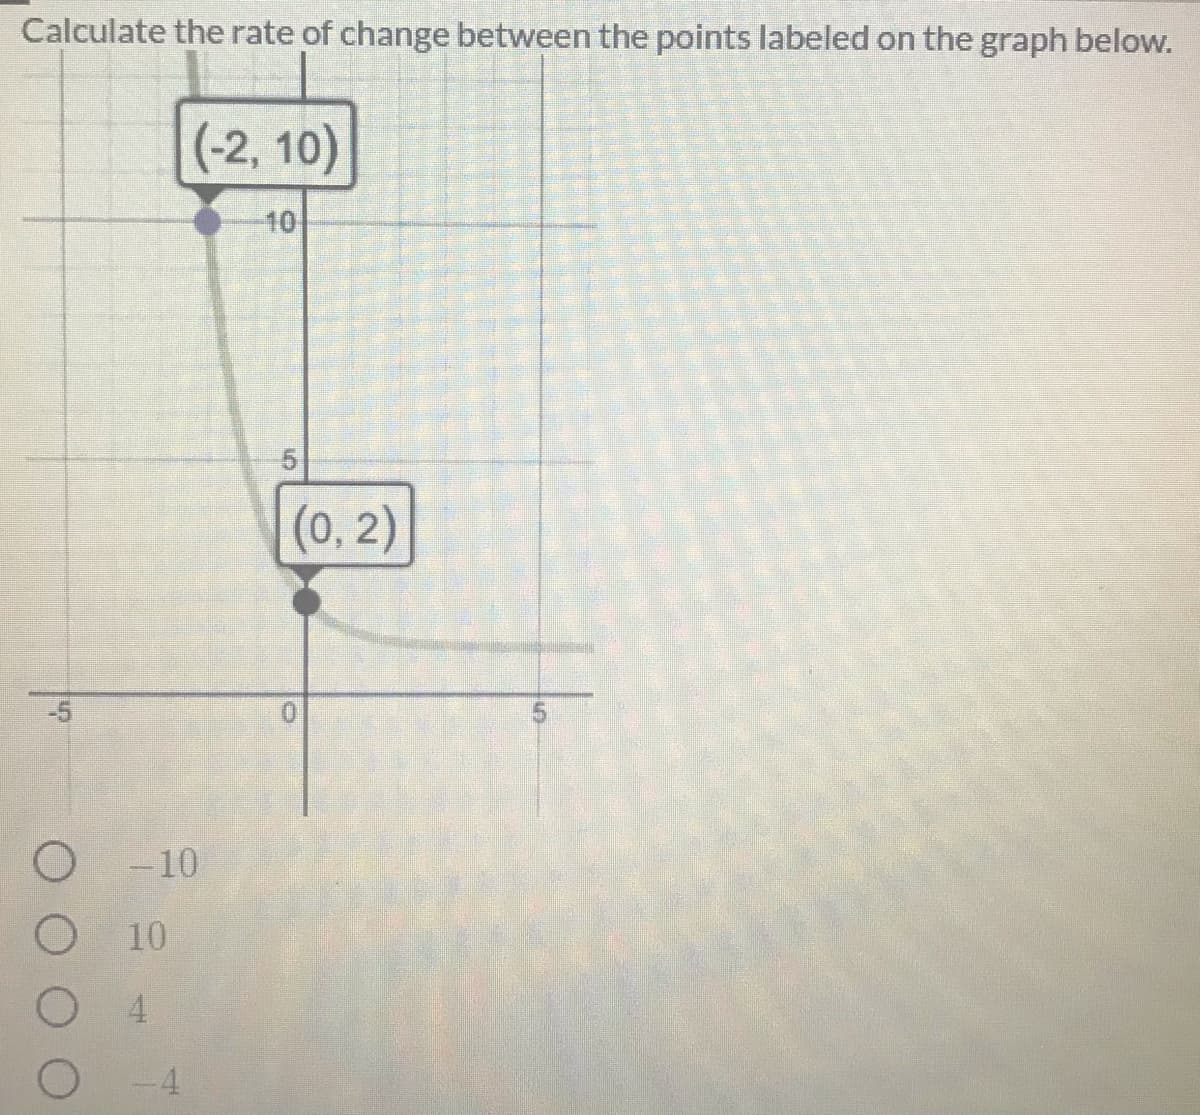 Calculate the rate of change between the points labeled on the graph below.
(-2, 10)
10
(0, 2)
-5
O - 10
10
